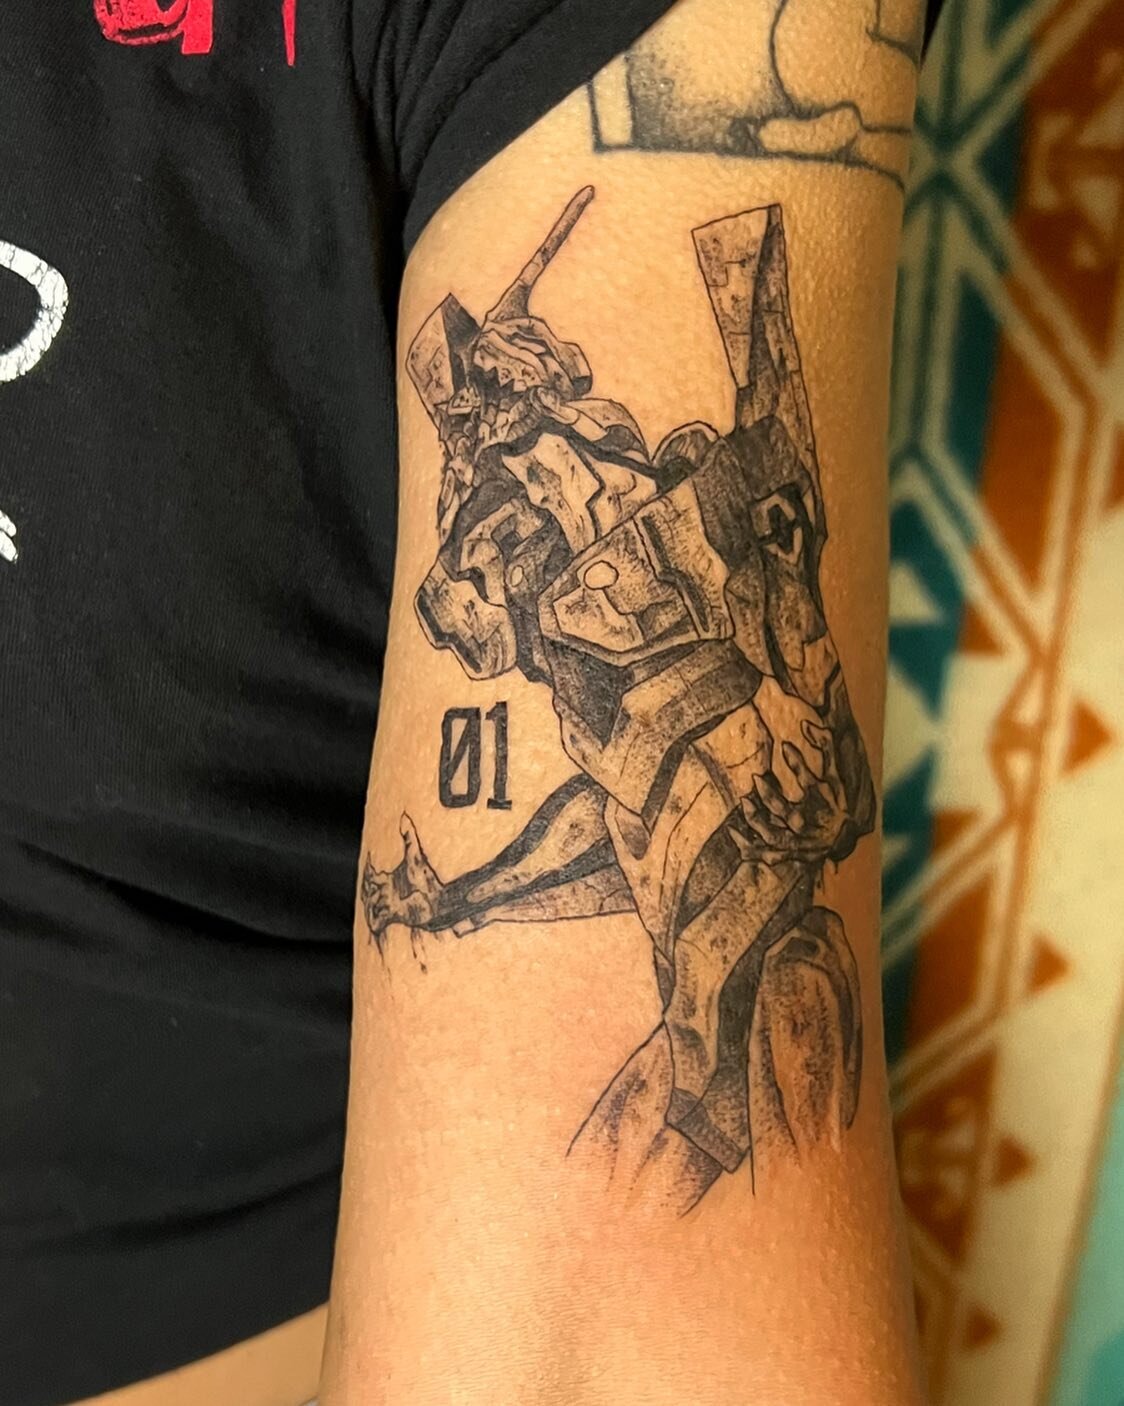 🩸Eva Unit 01 going Beserk for Tre!🩸They were such a trooper for letting me go all out on the details. Thank you for the trust of letting me add to your creepy manga arm! #evangelion #evaunit01 #mangatattoo #horrormanga #animetattoo #blackandgreytat